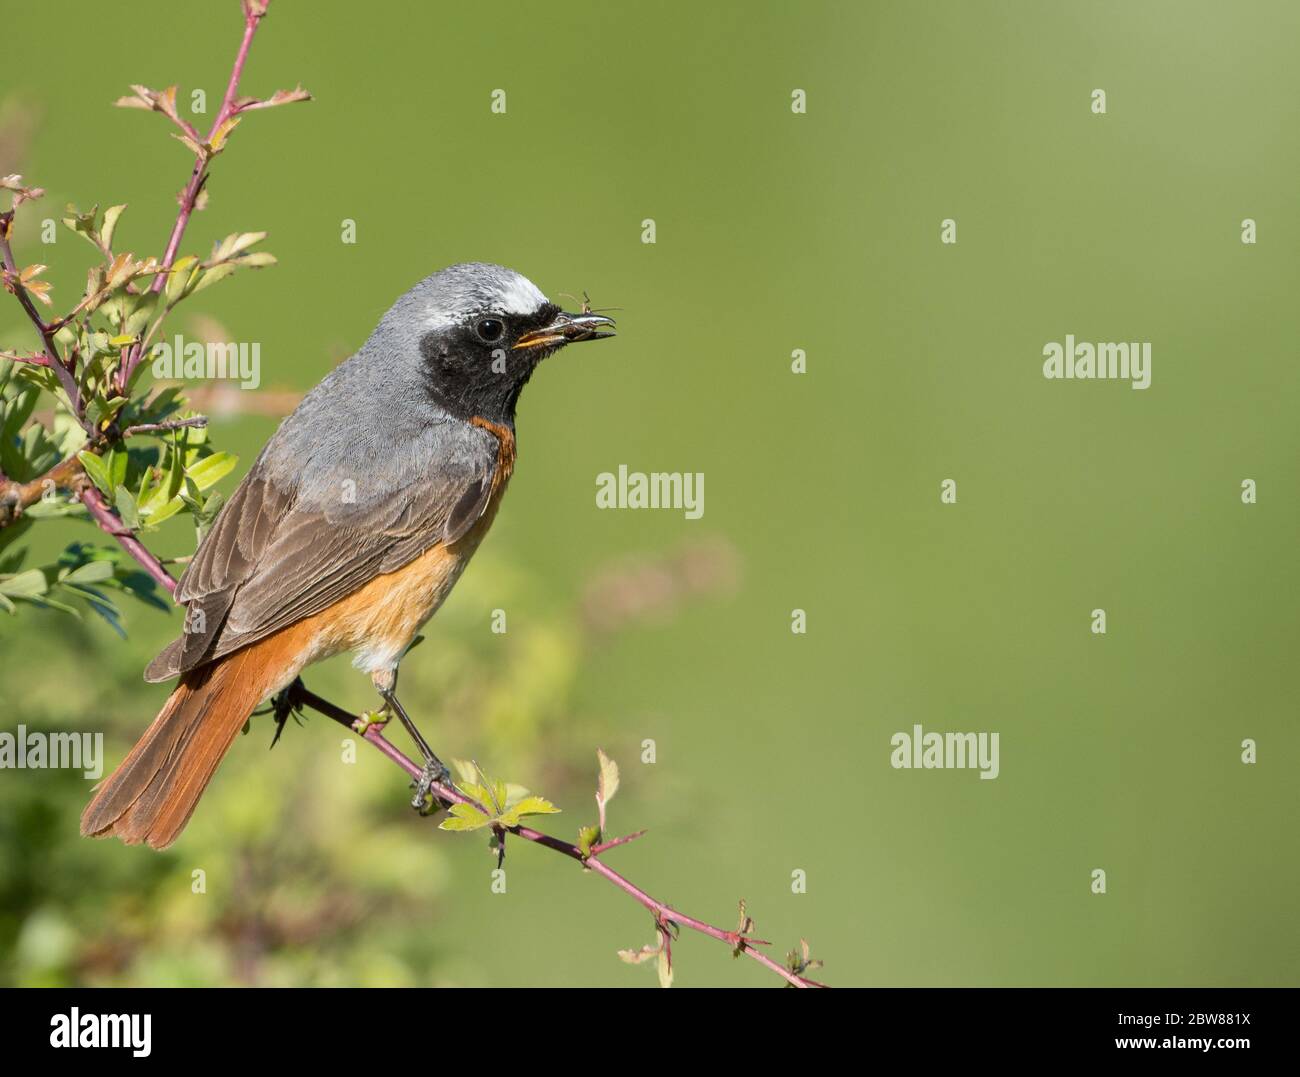 A male Common Redstart (Phoenicurus phoenicurus) in breeding plumage perched with food in its beak. Taken on Cleeve Hill, Gloucestershire, UK. Stock Photo